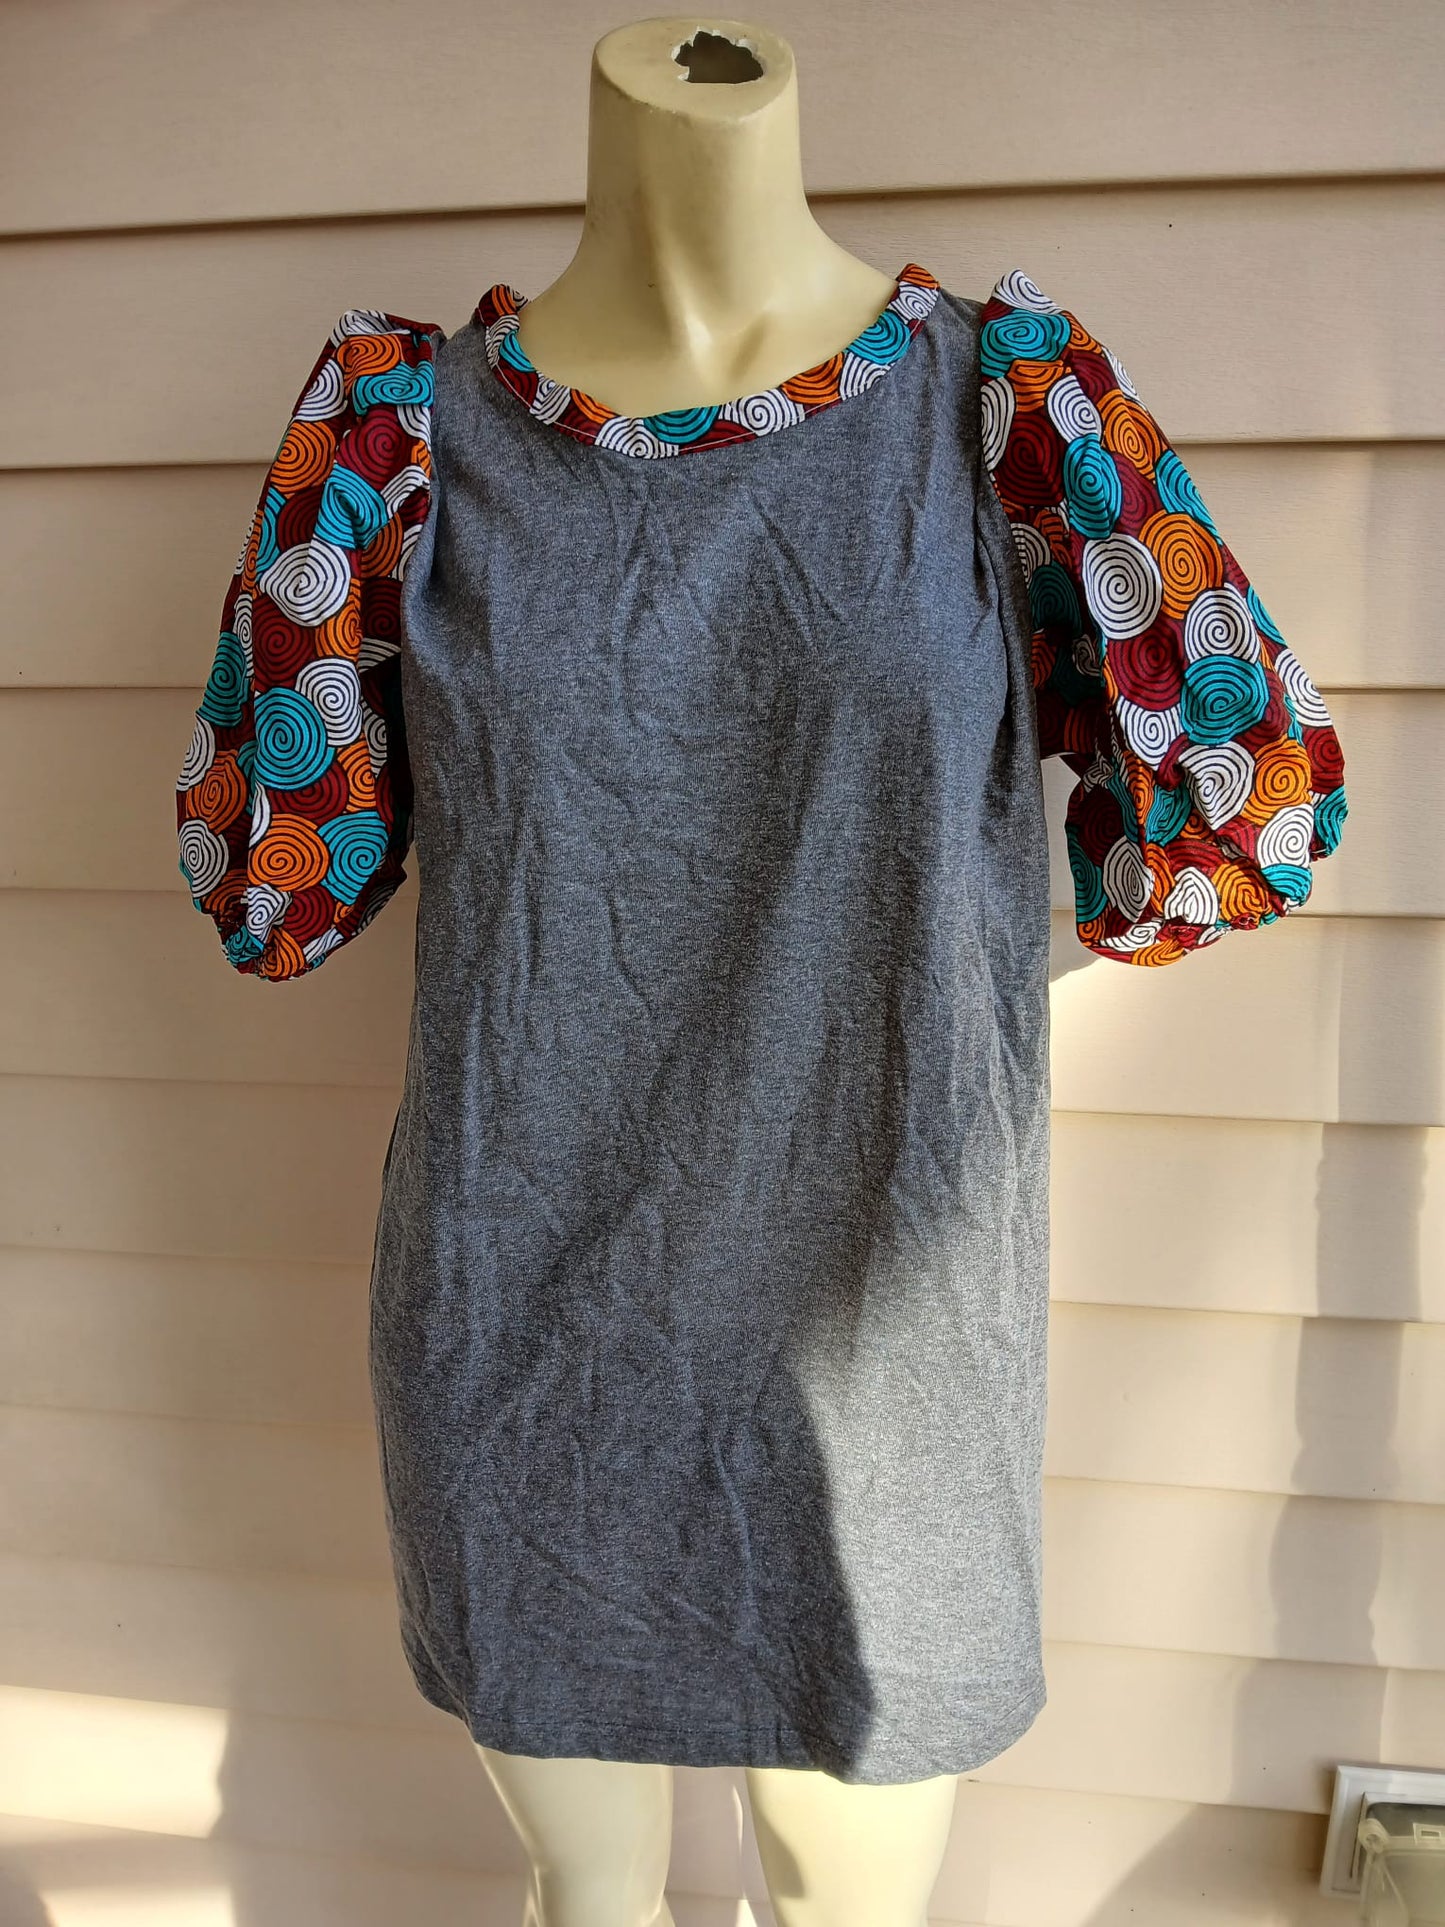 T shirt with African sleeve